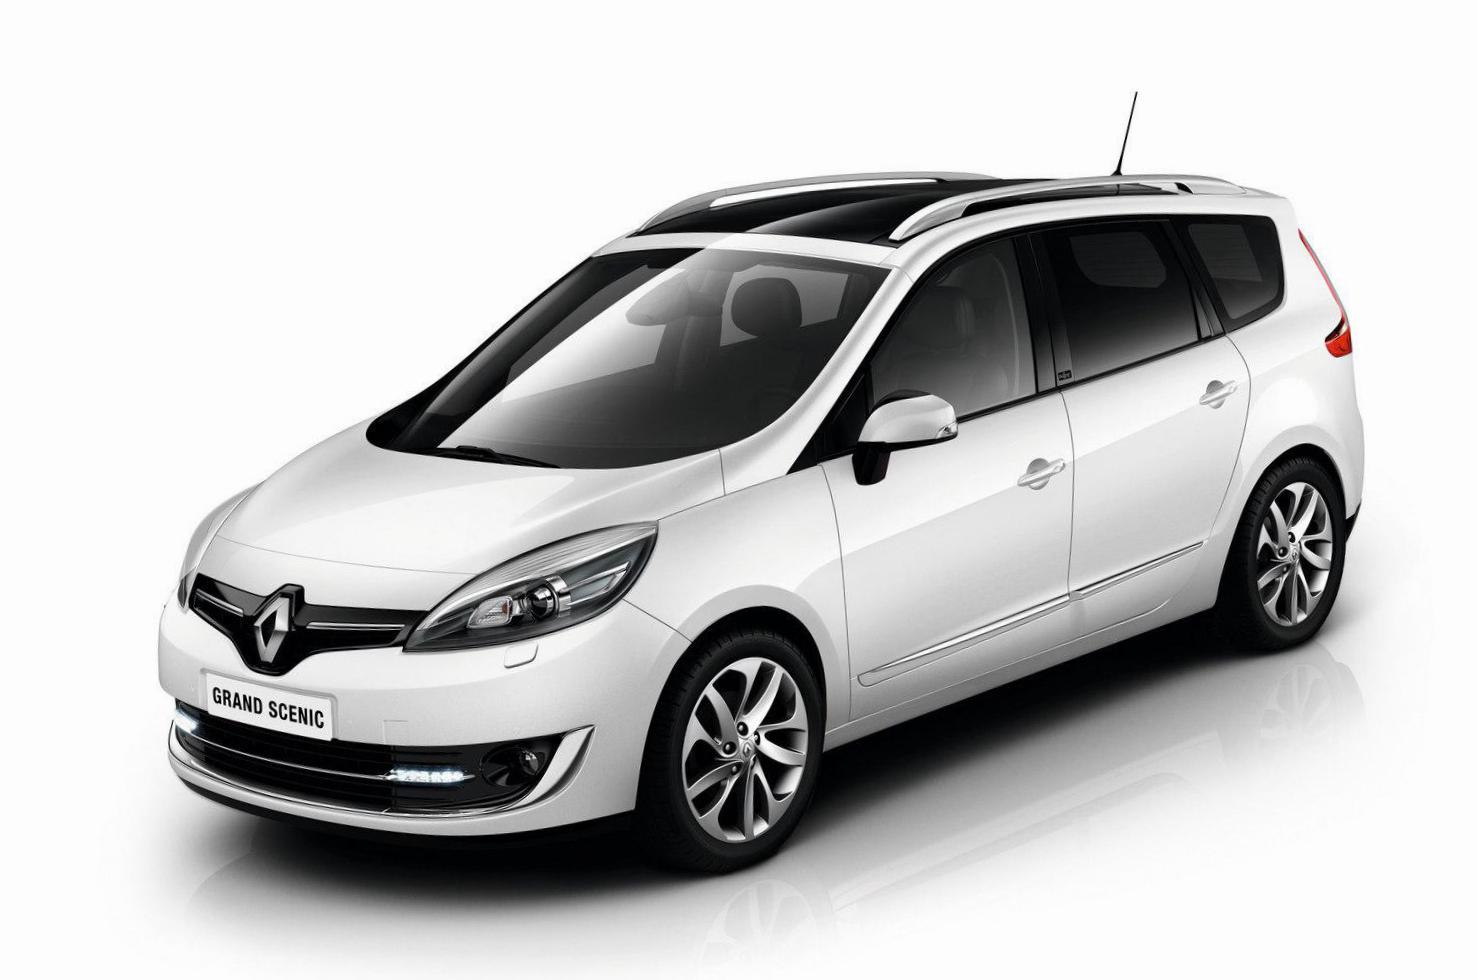 Grand Scenic Renault approved 2010